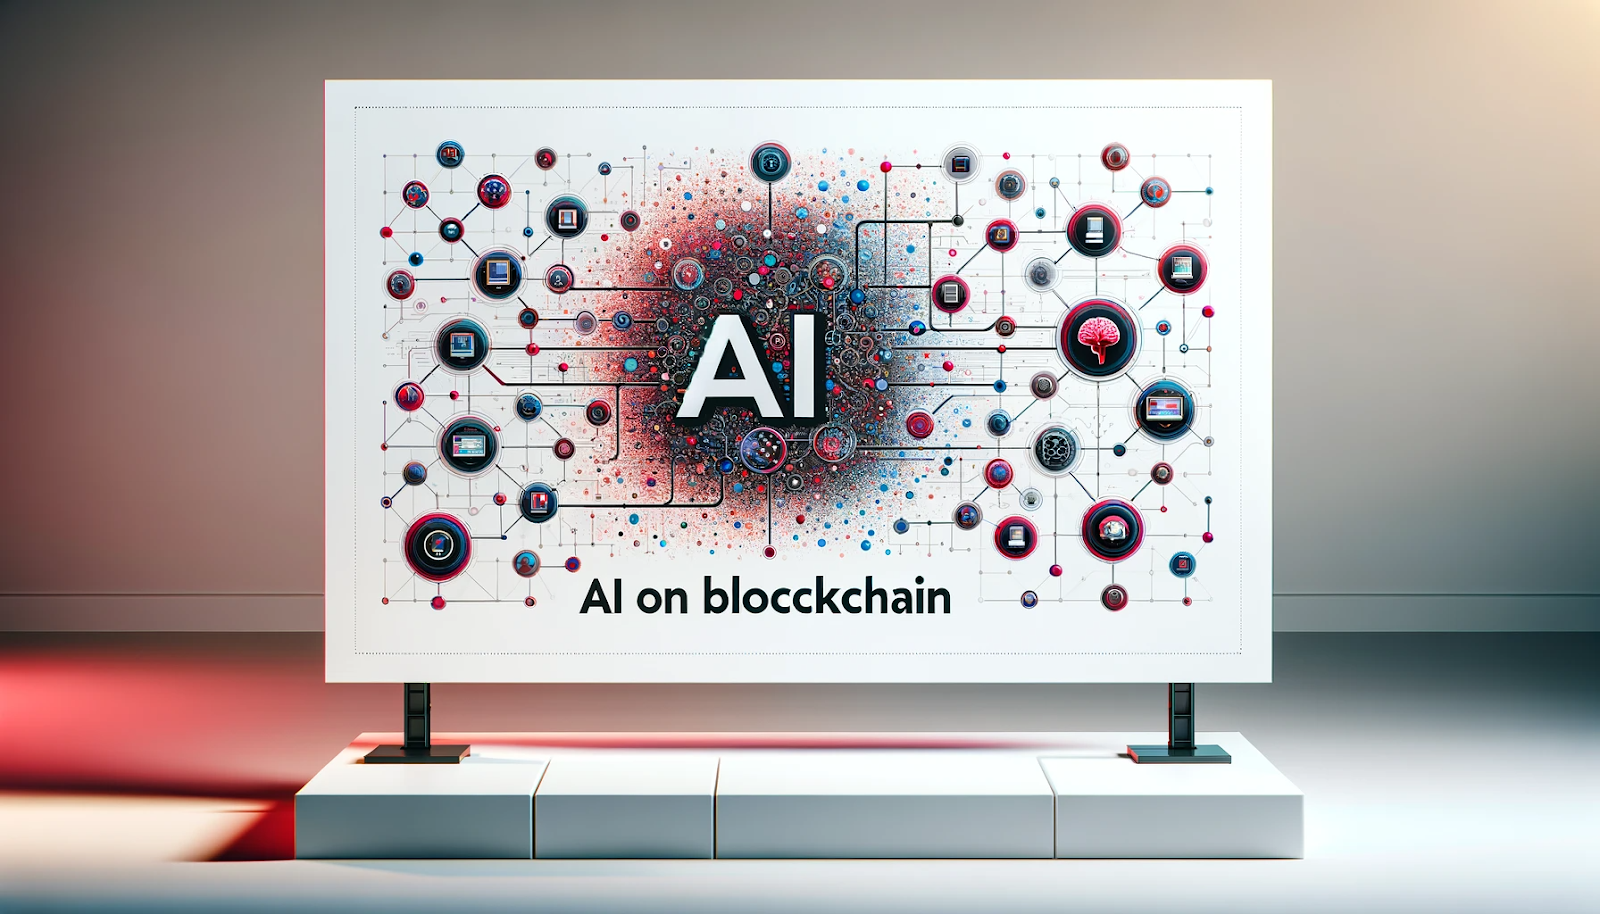 Revolutionizing the Digital World: How AI on Blockchain is Shaping Our Future